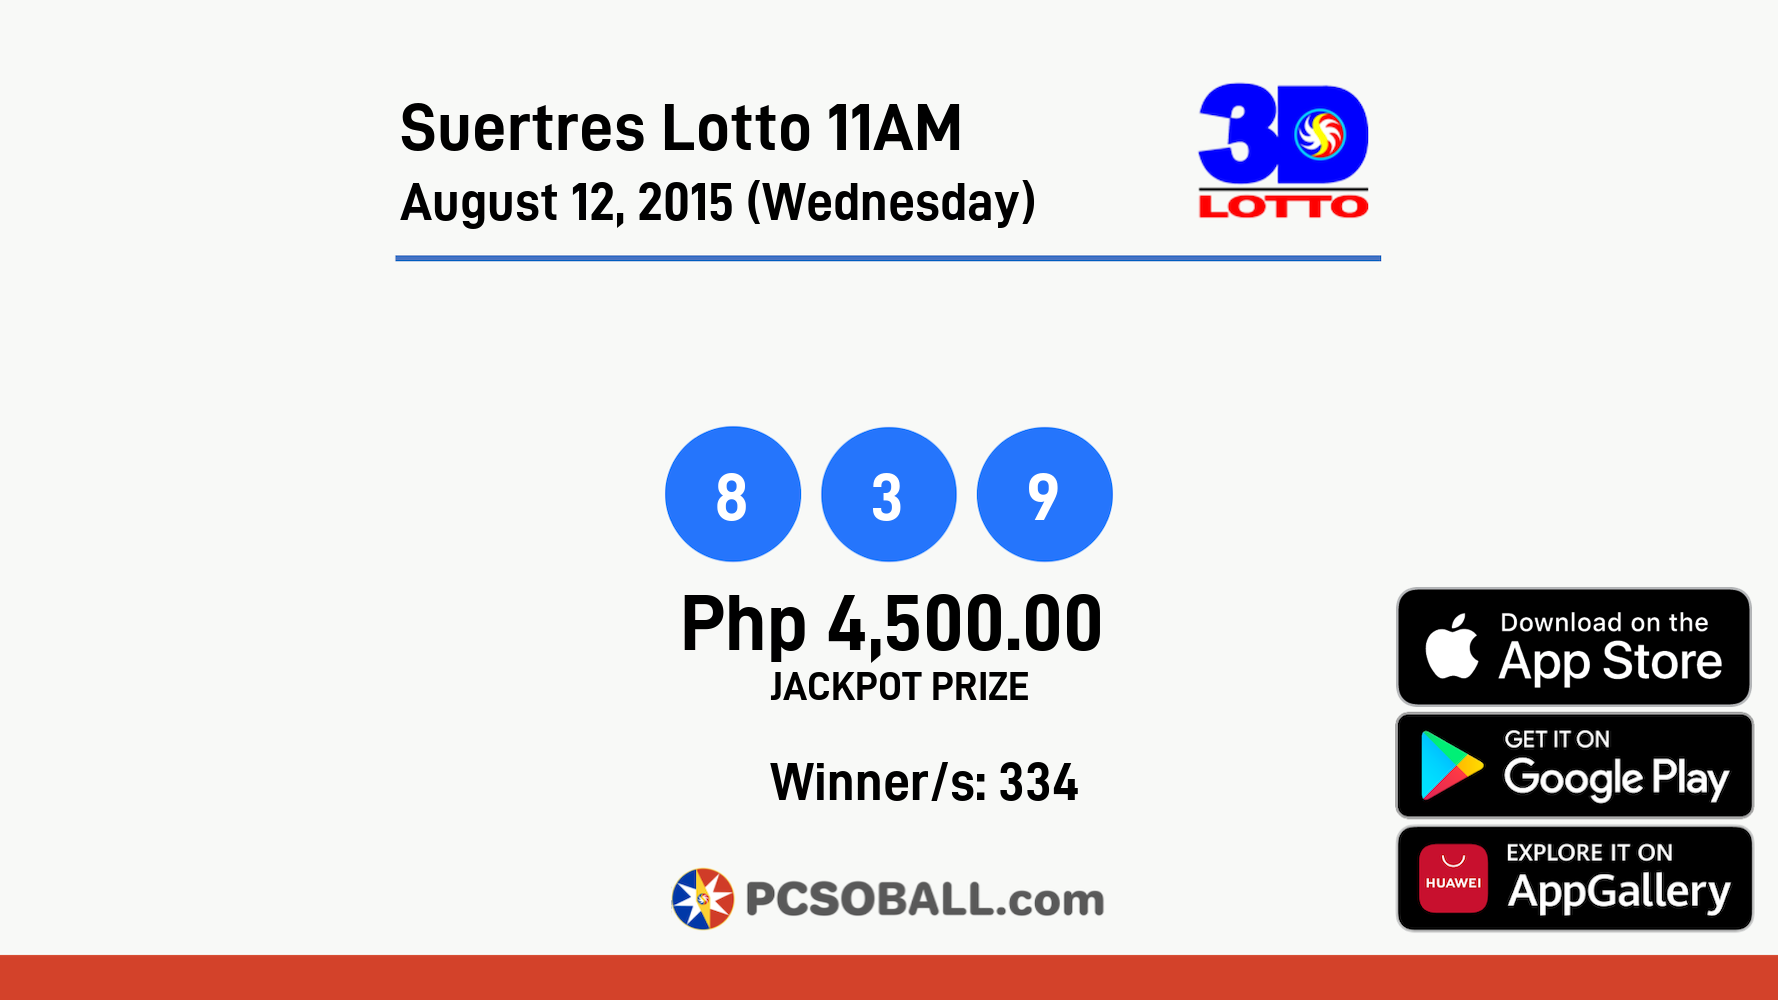 Suertres Lotto 11AM August 12, 2015 (Wednesday) Result